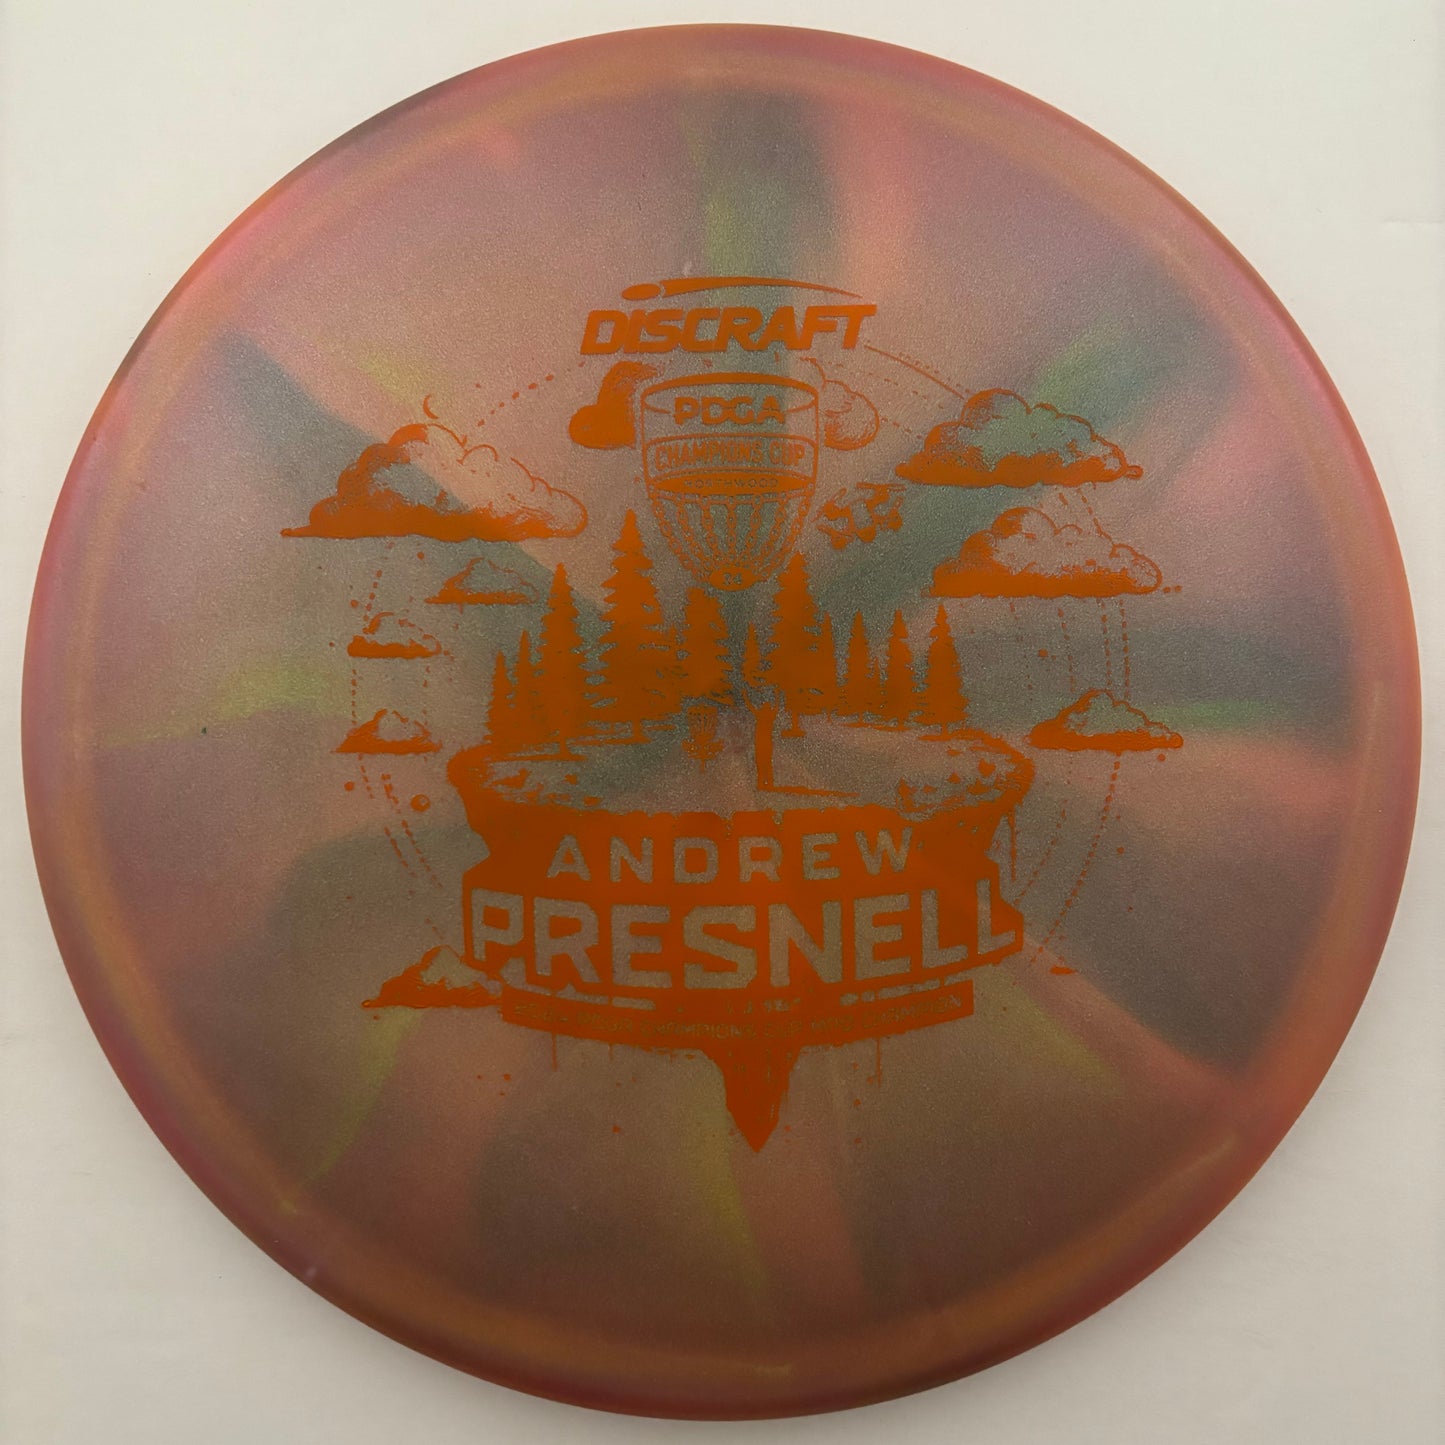 Presnell Champions Cup Drone